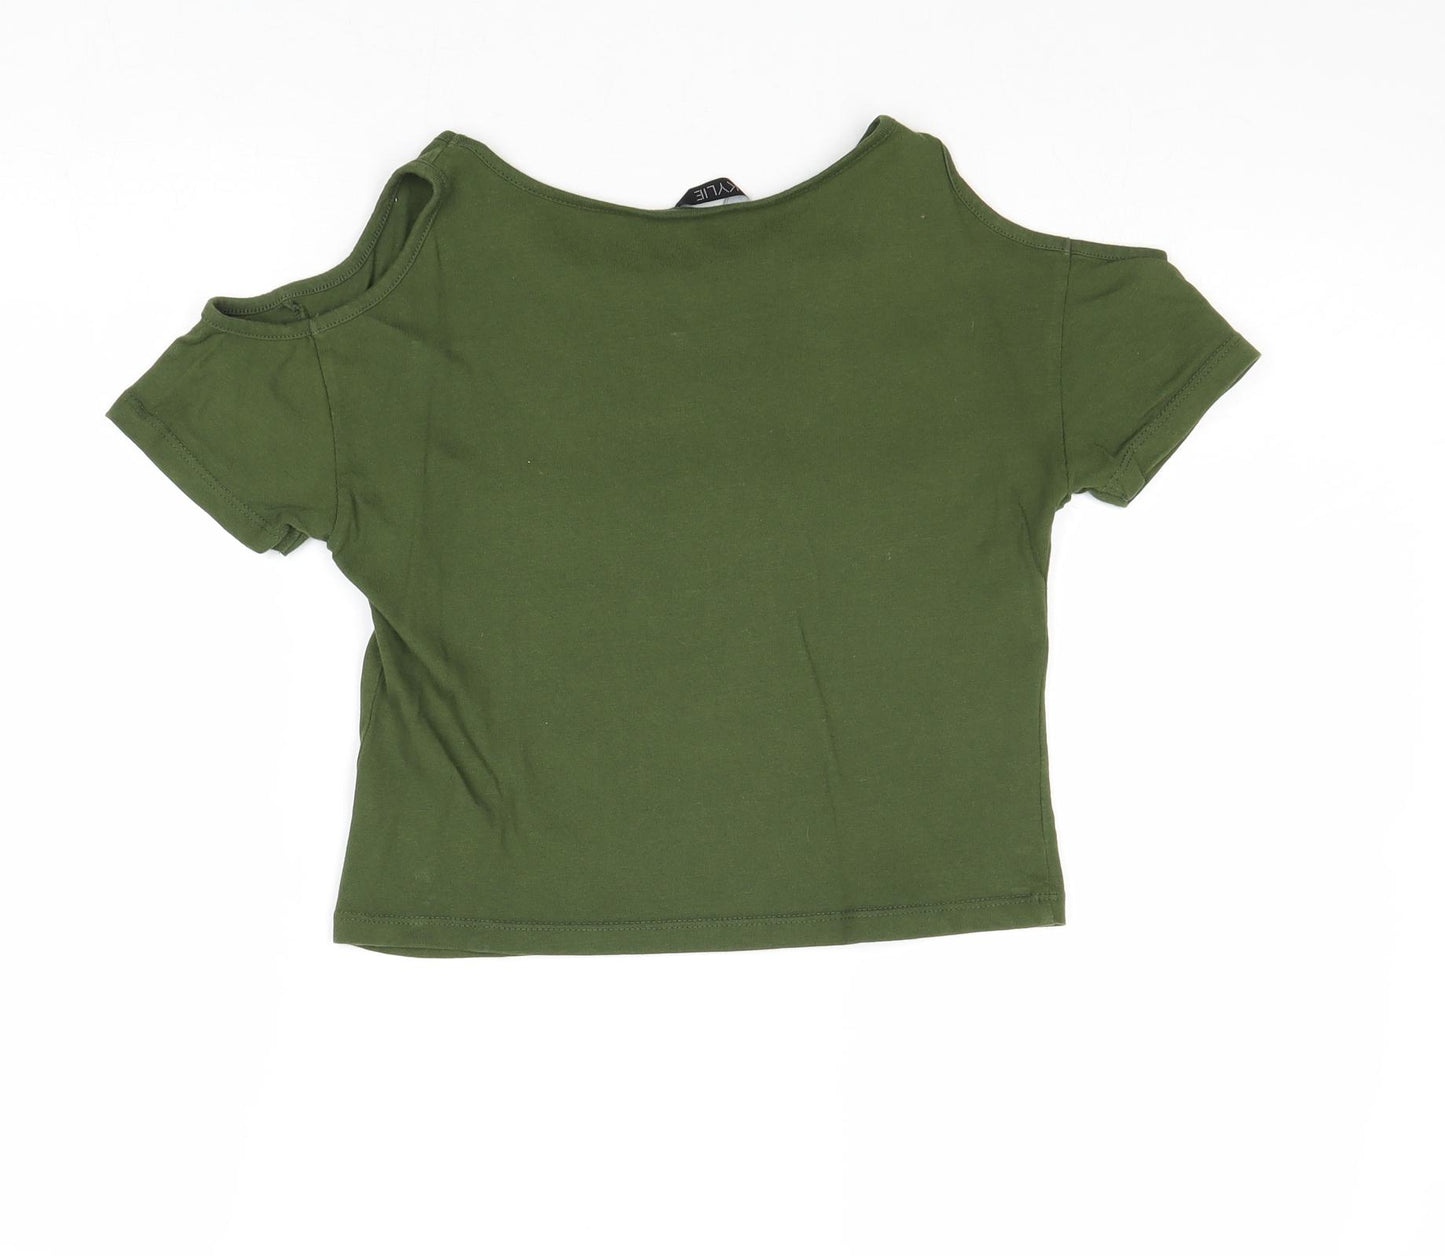 M&Co Girls Green Cotton Basic T-Shirt Size 11-12 Years Round Neck Pullover - Paris, New York, Cold Shoulder